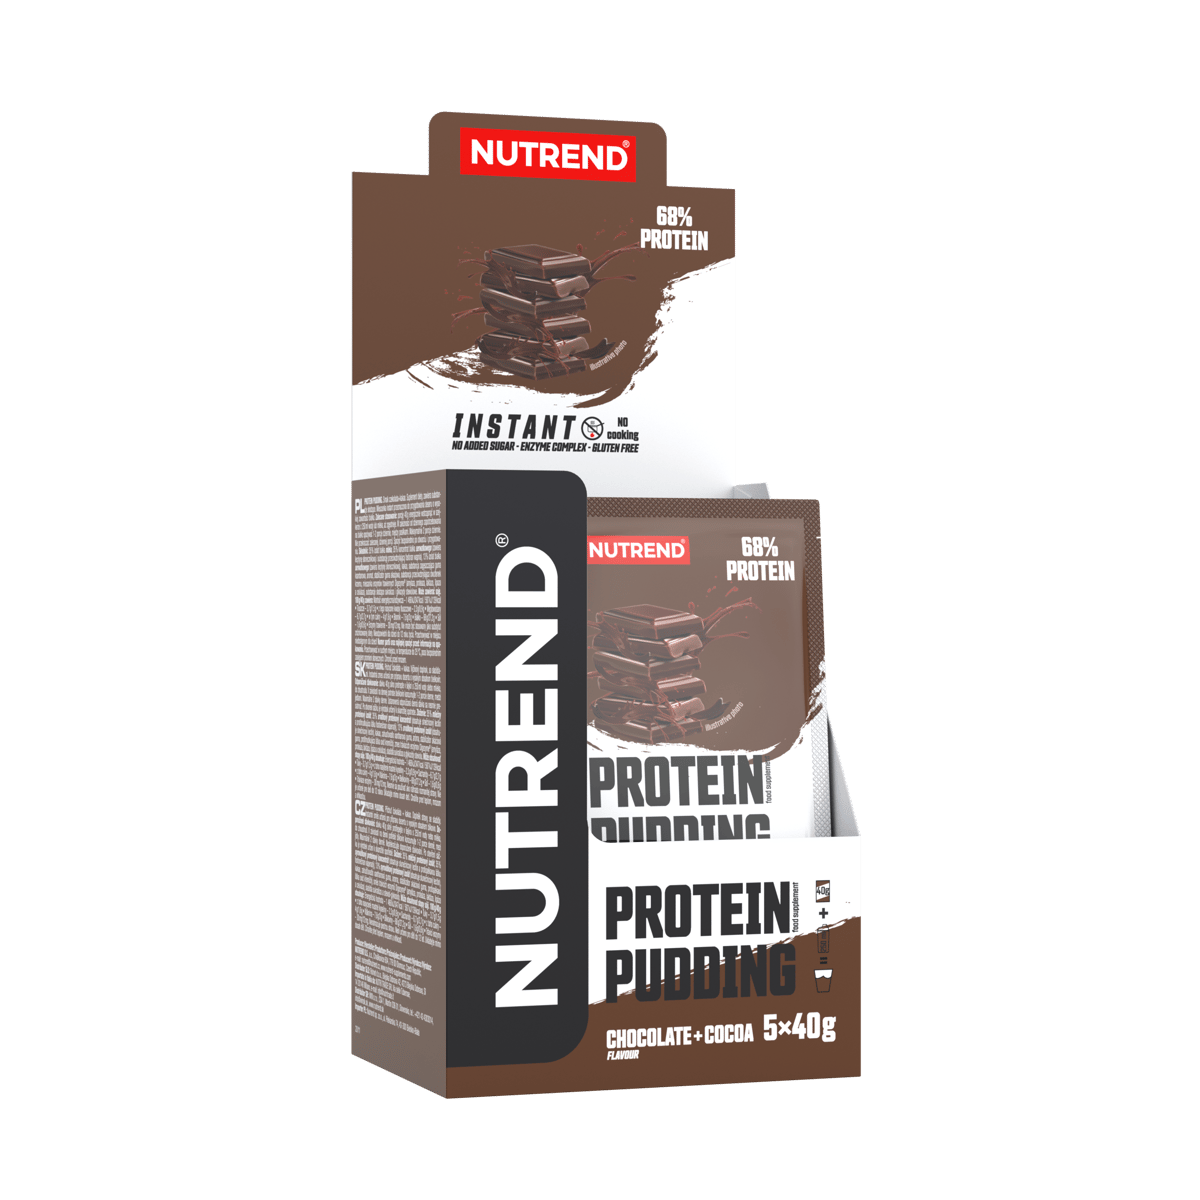 Protein Pudding #0